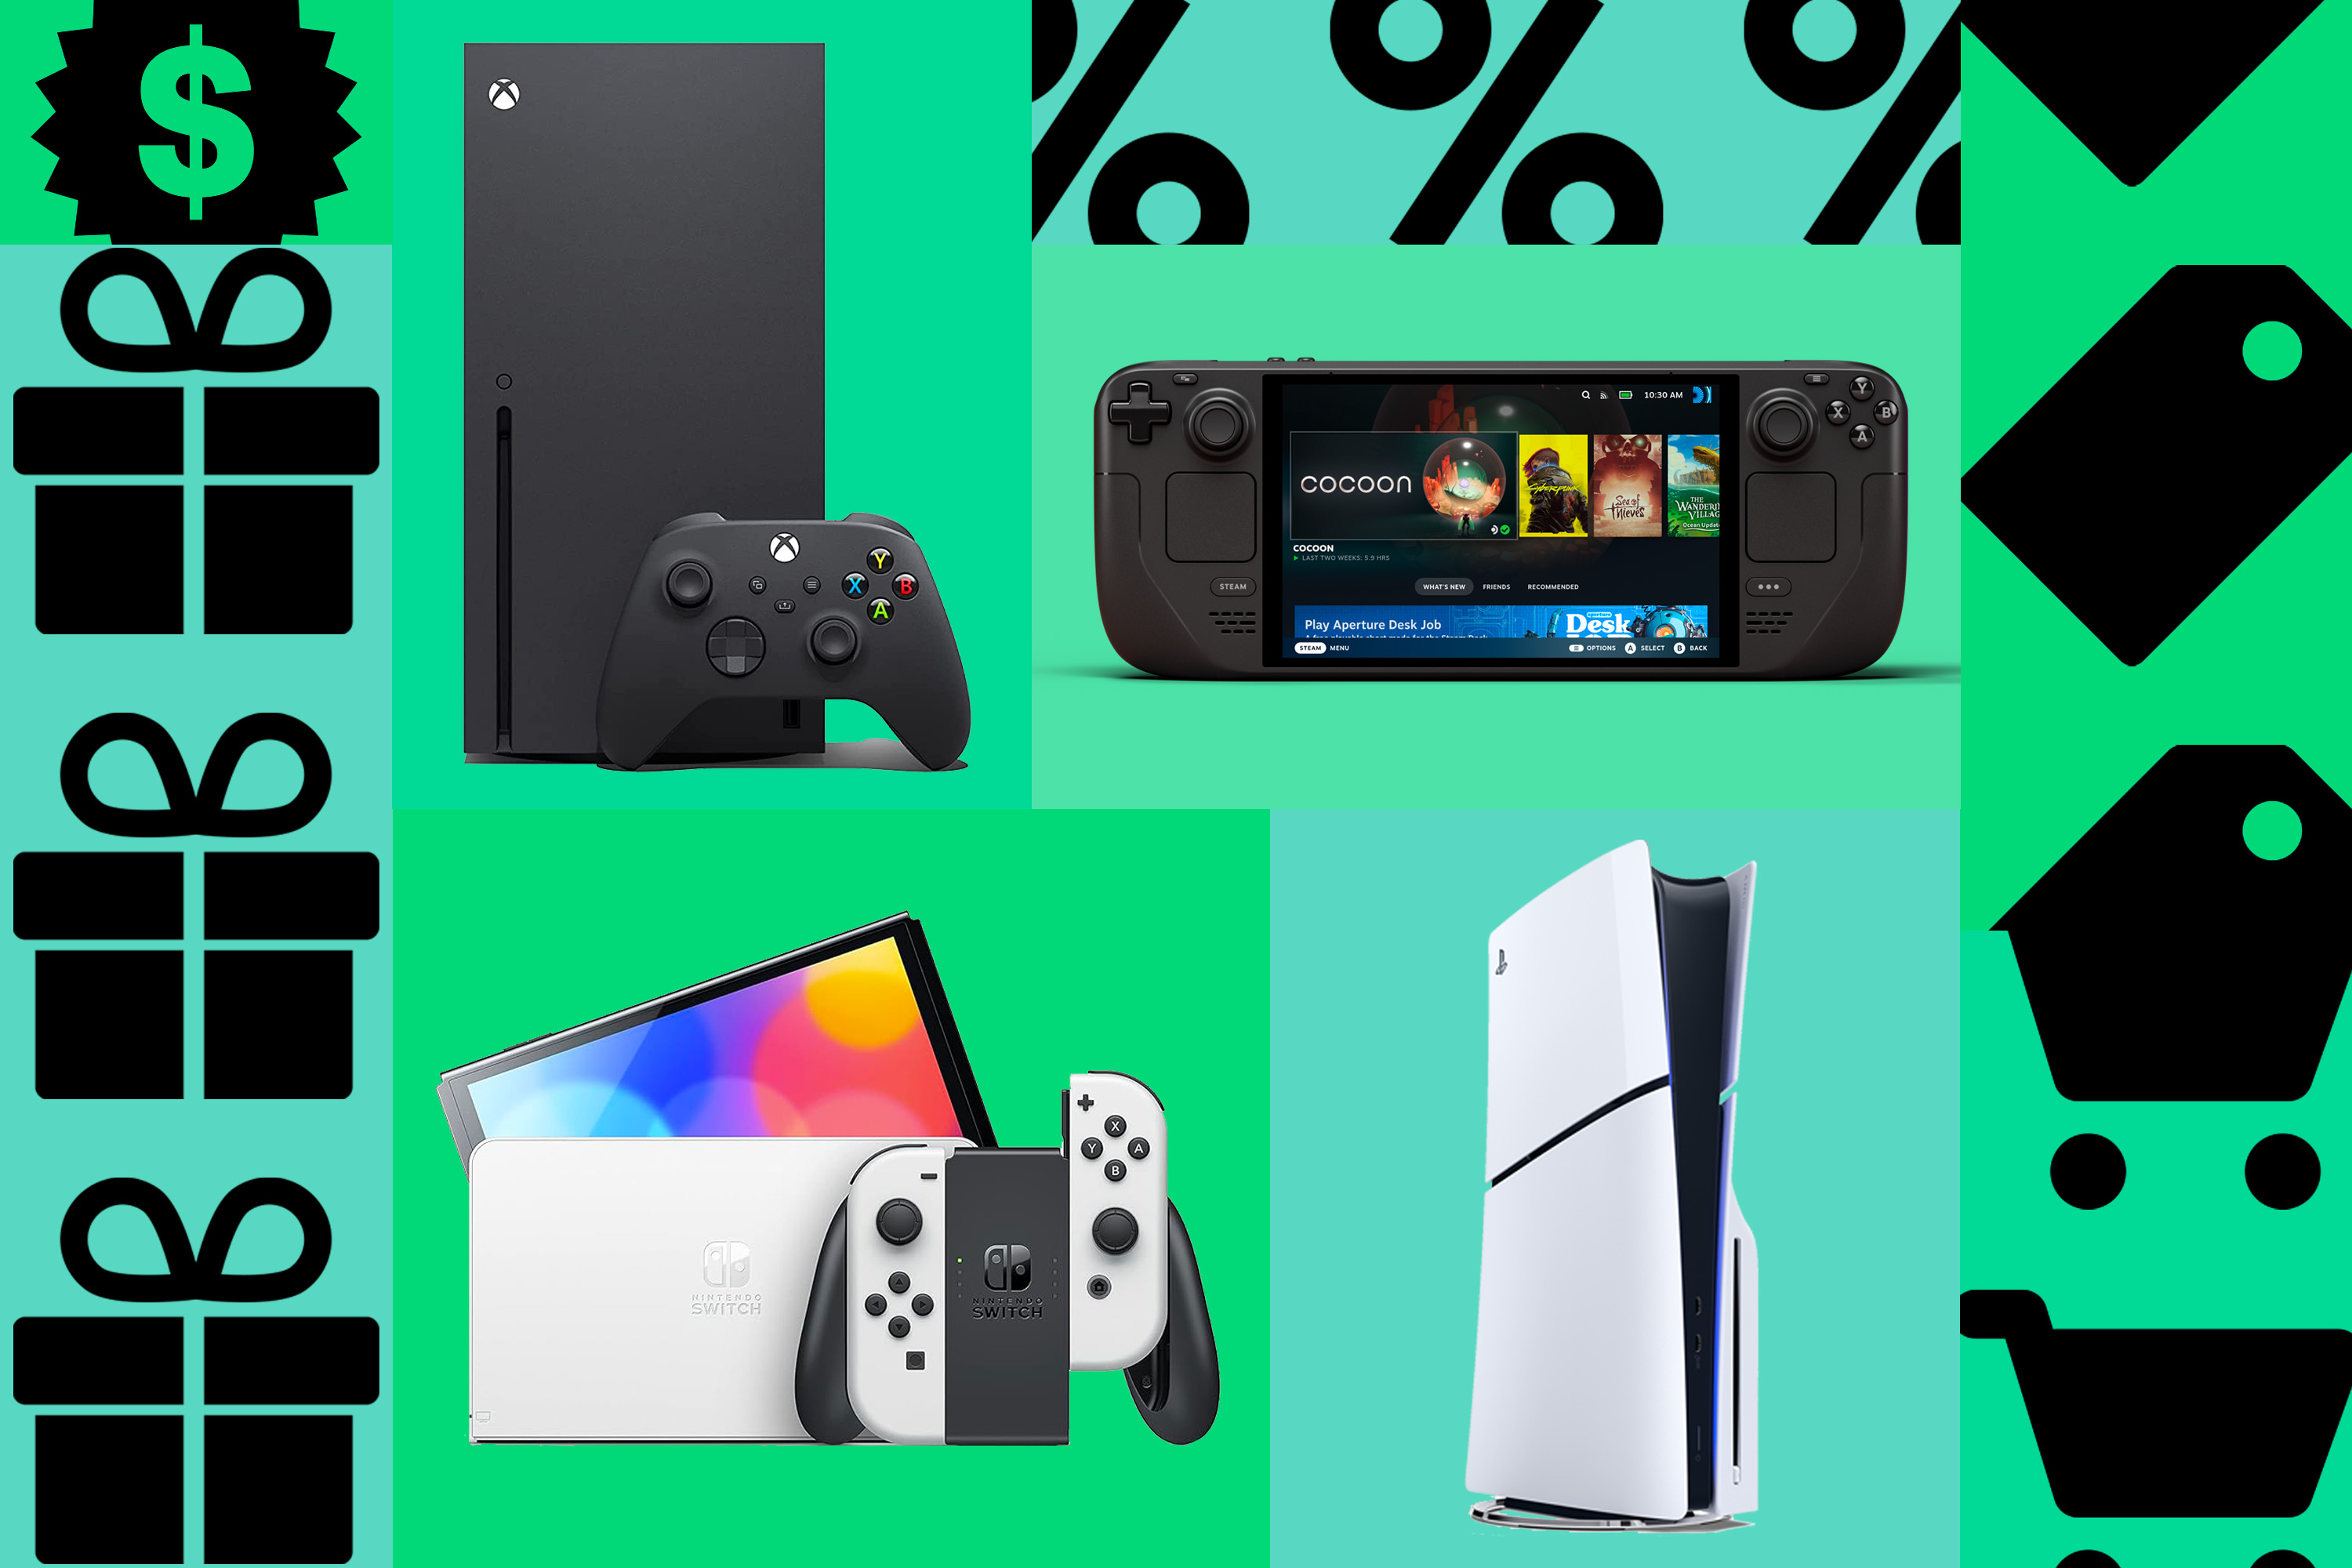 An image composition containing the Xbox Series X, Steam Deck OLED, Nintendo Switch OLED, and a PS5 on a green and blue background. The products are surrounded by gift box symbols, percentage symbols, and shopping cart symbols.